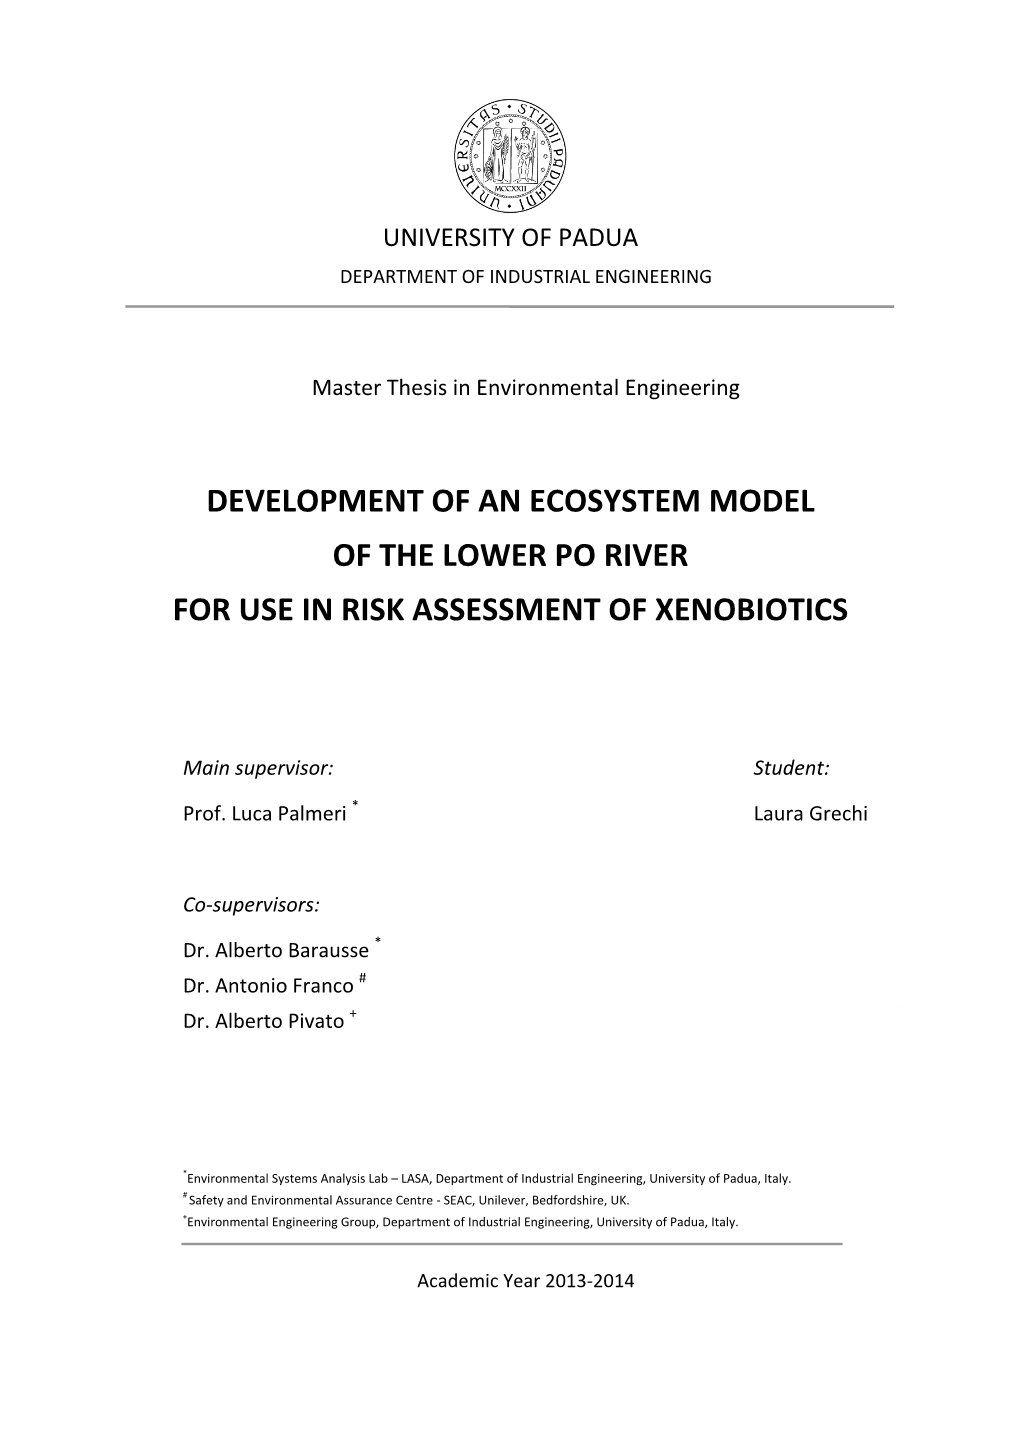 Development of an Ecosystem Model of Lower River Po for Use in Risk